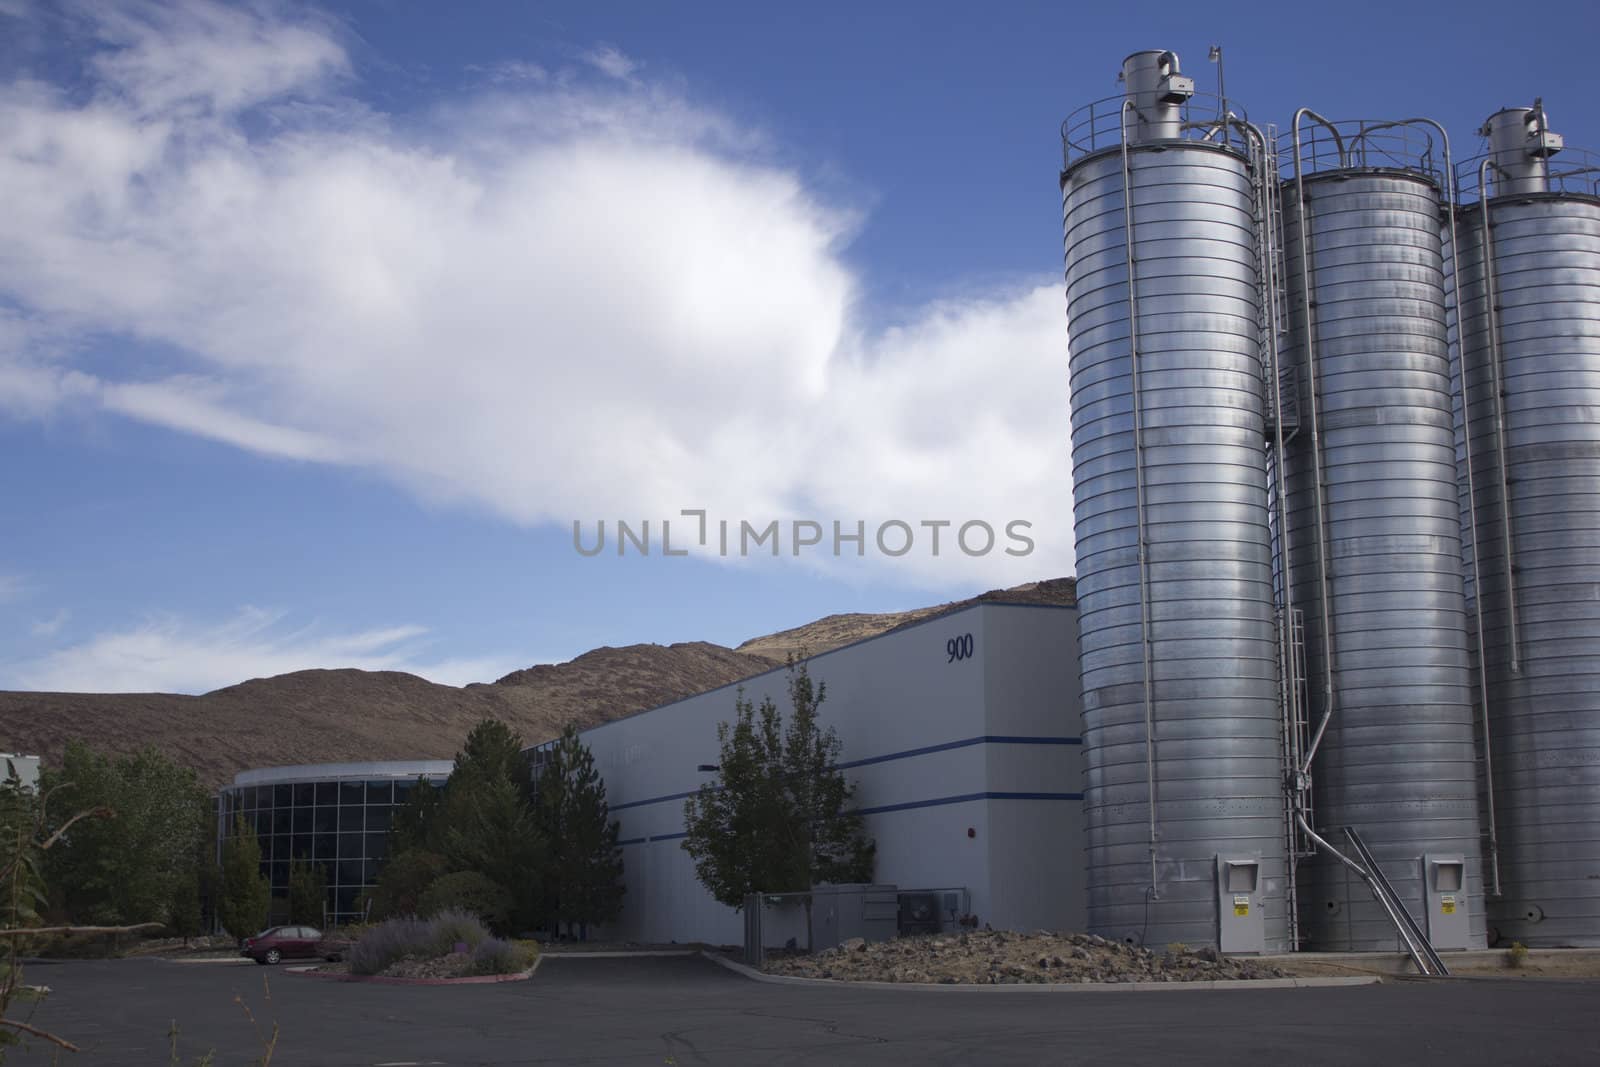 Business office or factory with silos on the side by jeremywhat